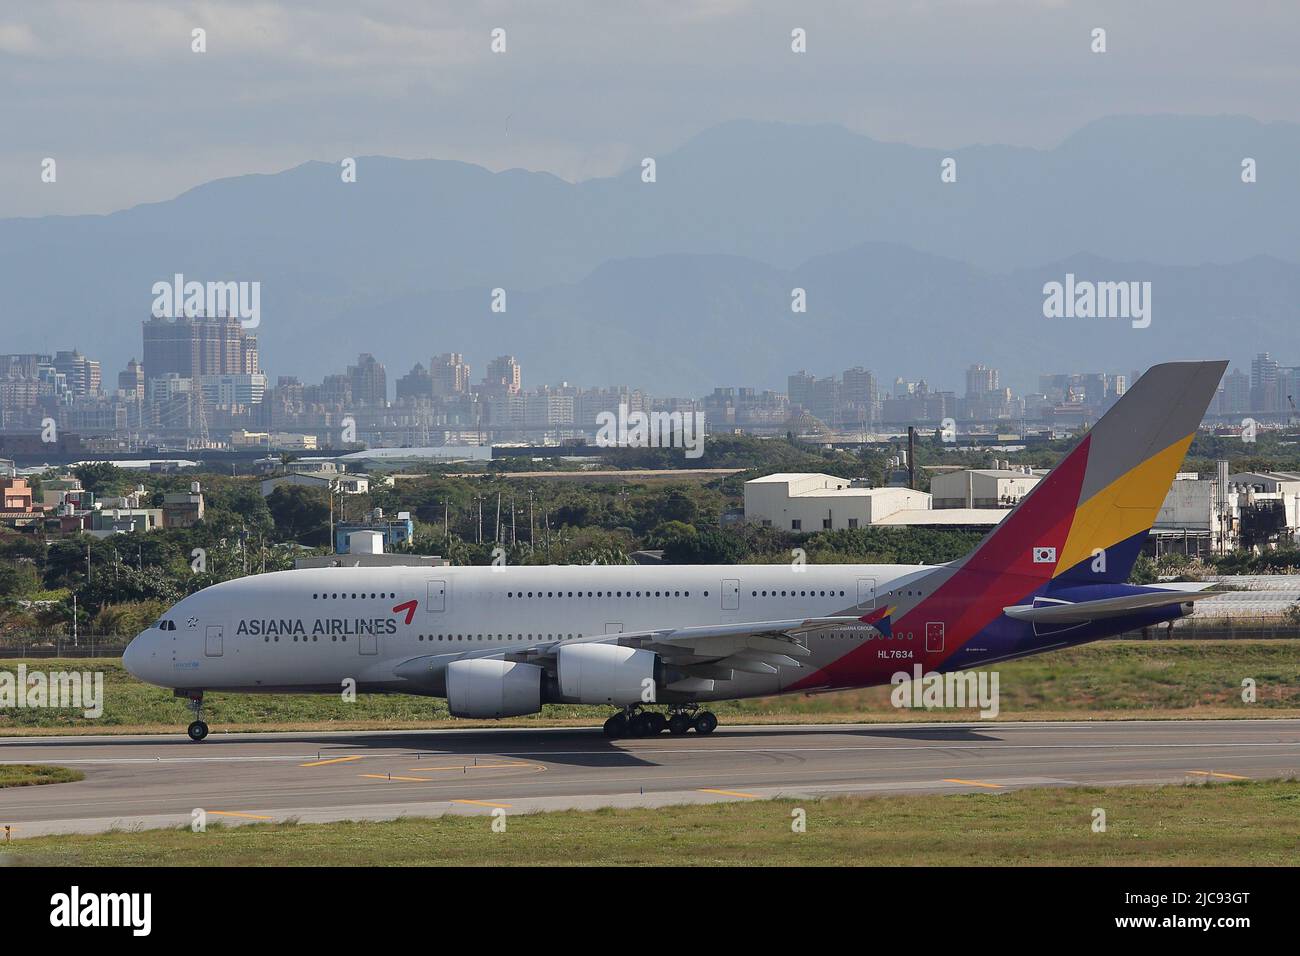 HL7634 Asiana Airlines Airbus A380 taxiing down the runway in Taoyuan International Airport (TPE) before taking off. Stock Photo